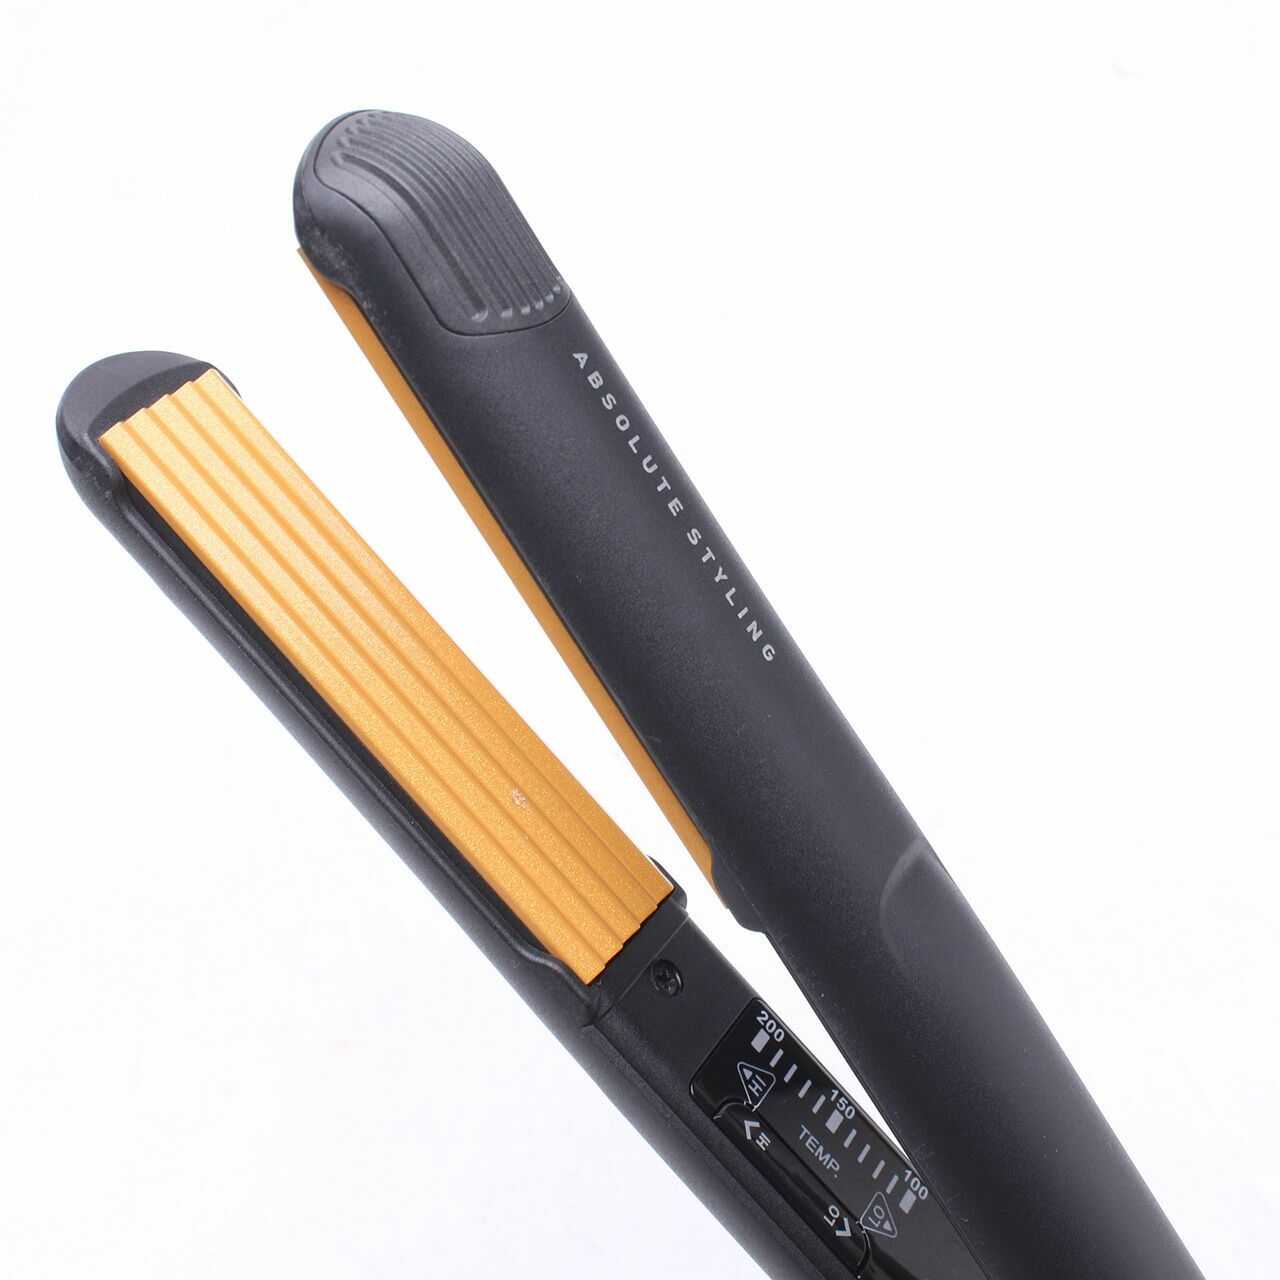 Glampalm Black Absolute Styling GP225AL Tools